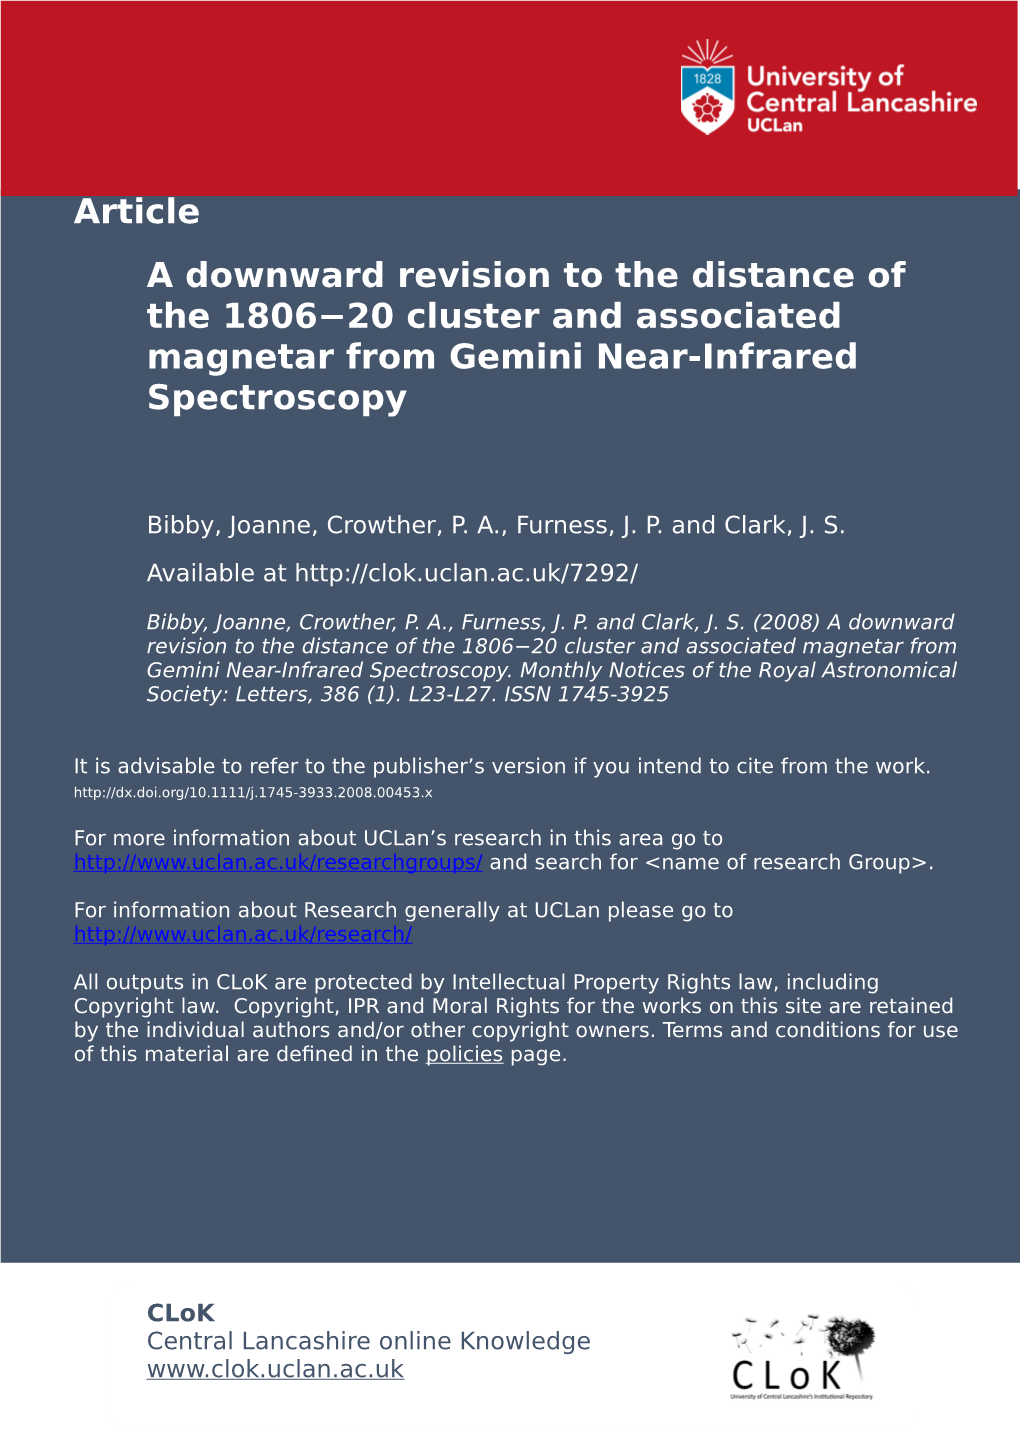 A Downward Revision to the Distance of the 1806−20 Cluster and Associated Magnetar from Gemini Near-Infrared Spectroscopy